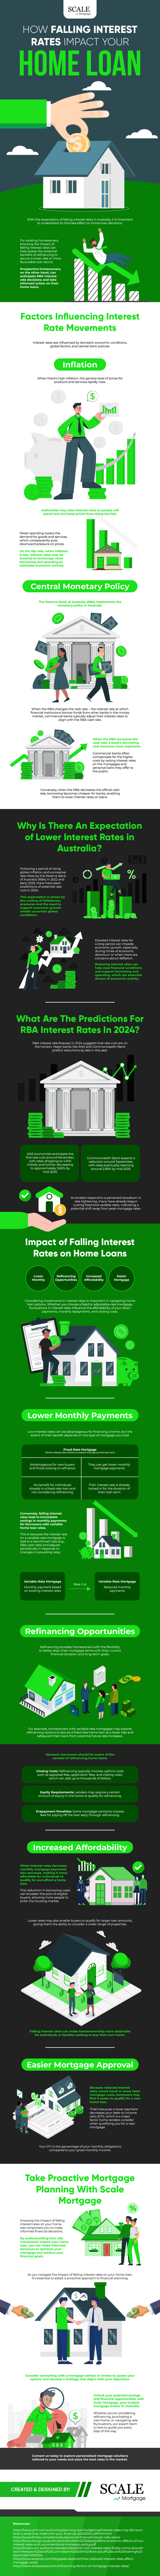 How Falling Interest Rates Impact Your Home Loan Infographic Image